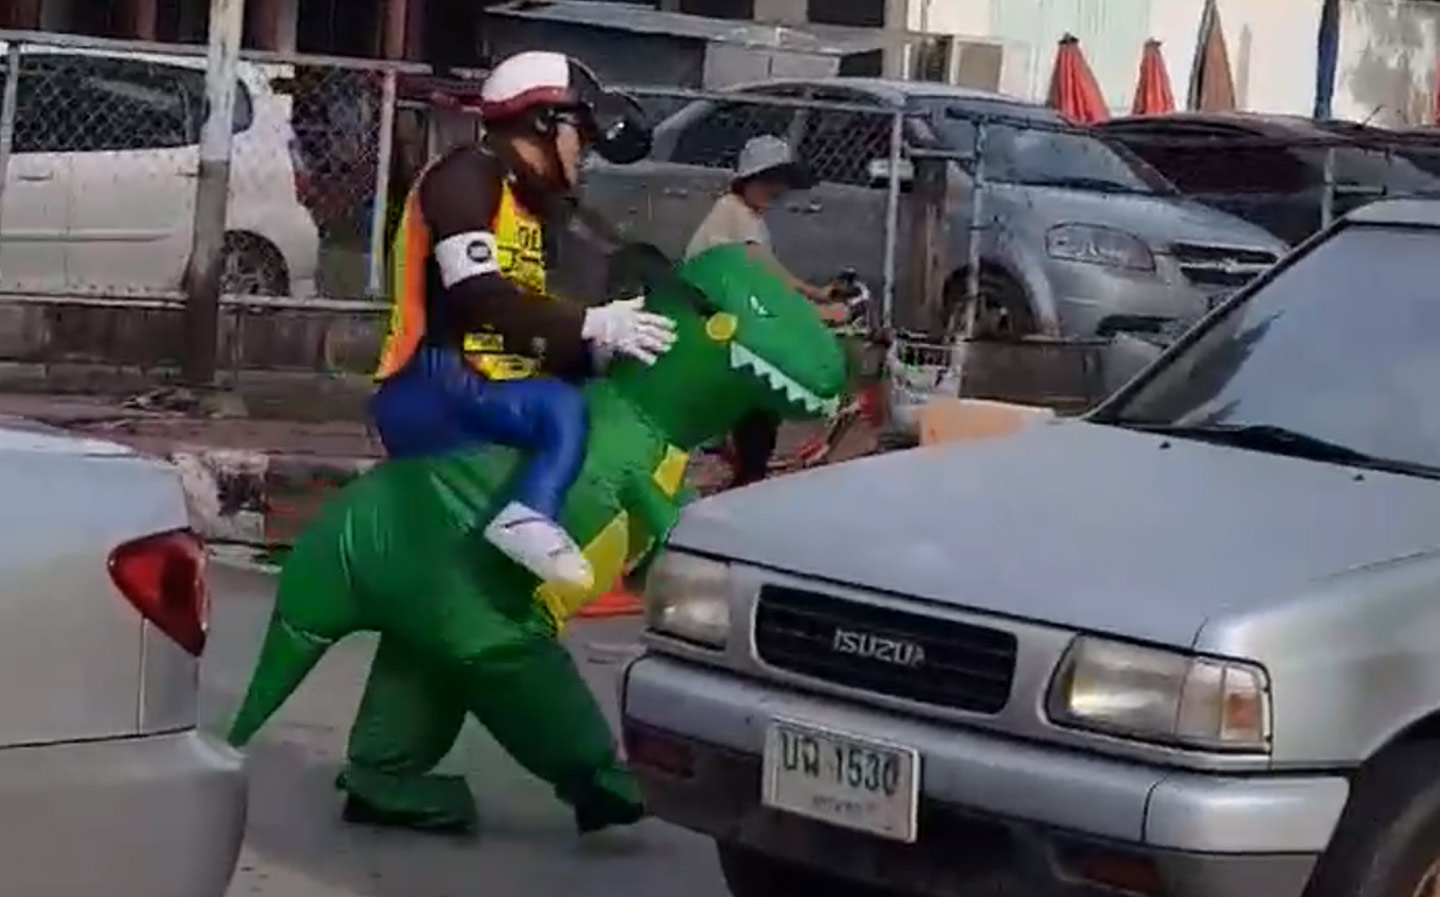 Police officer directs traffic while 'riding' dinosaur